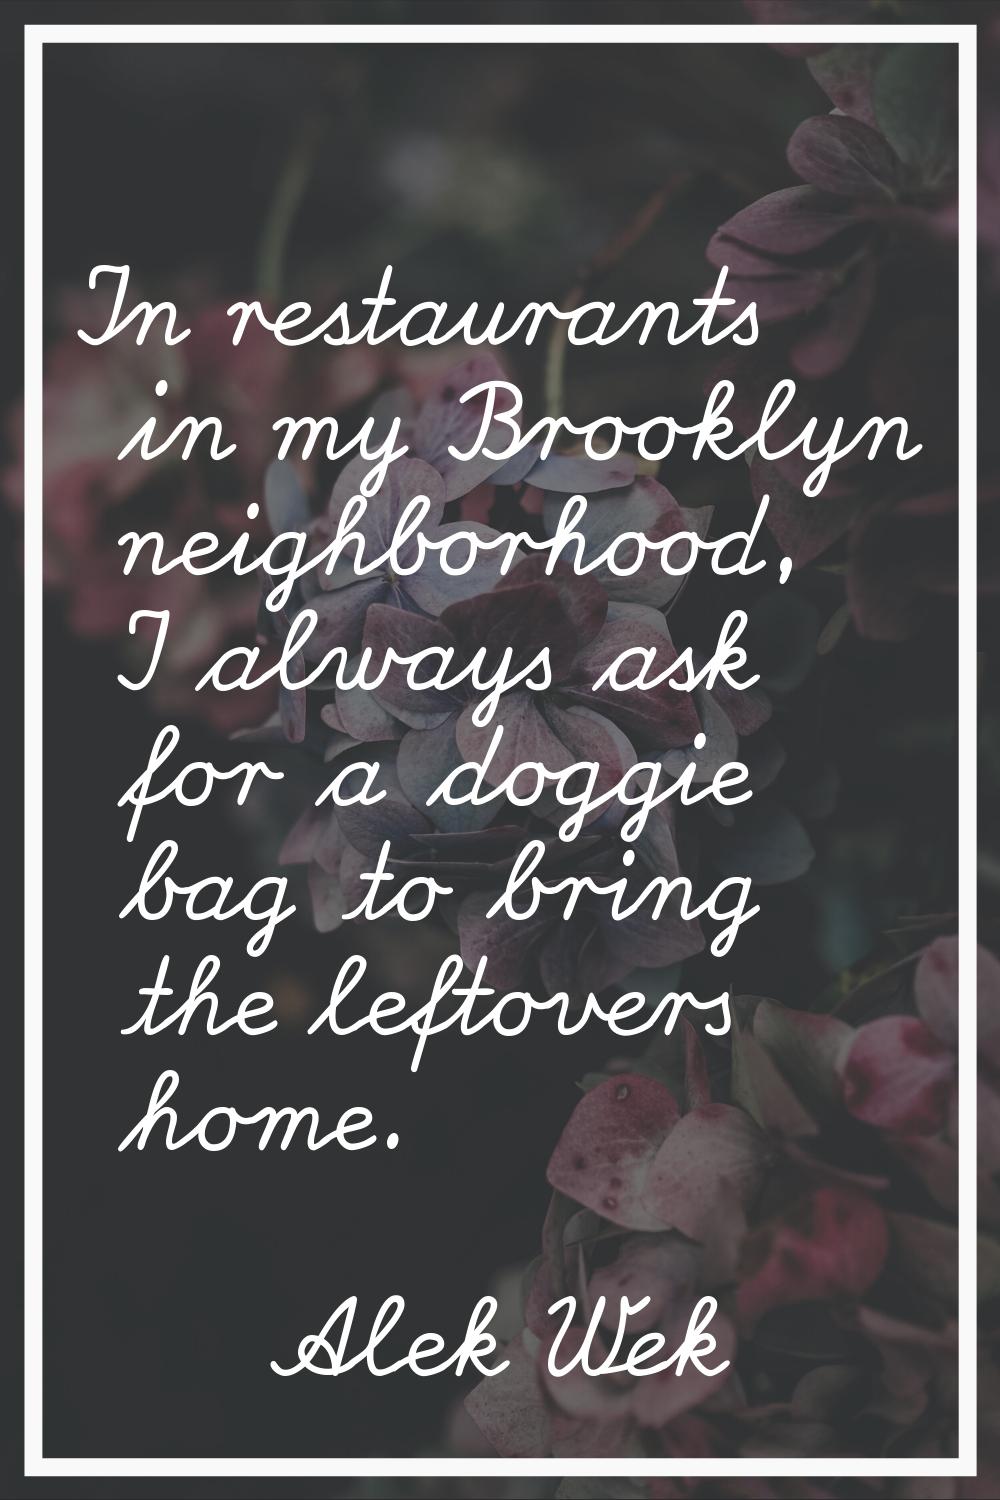 In restaurants in my Brooklyn neighborhood, I always ask for a doggie bag to bring the leftovers ho